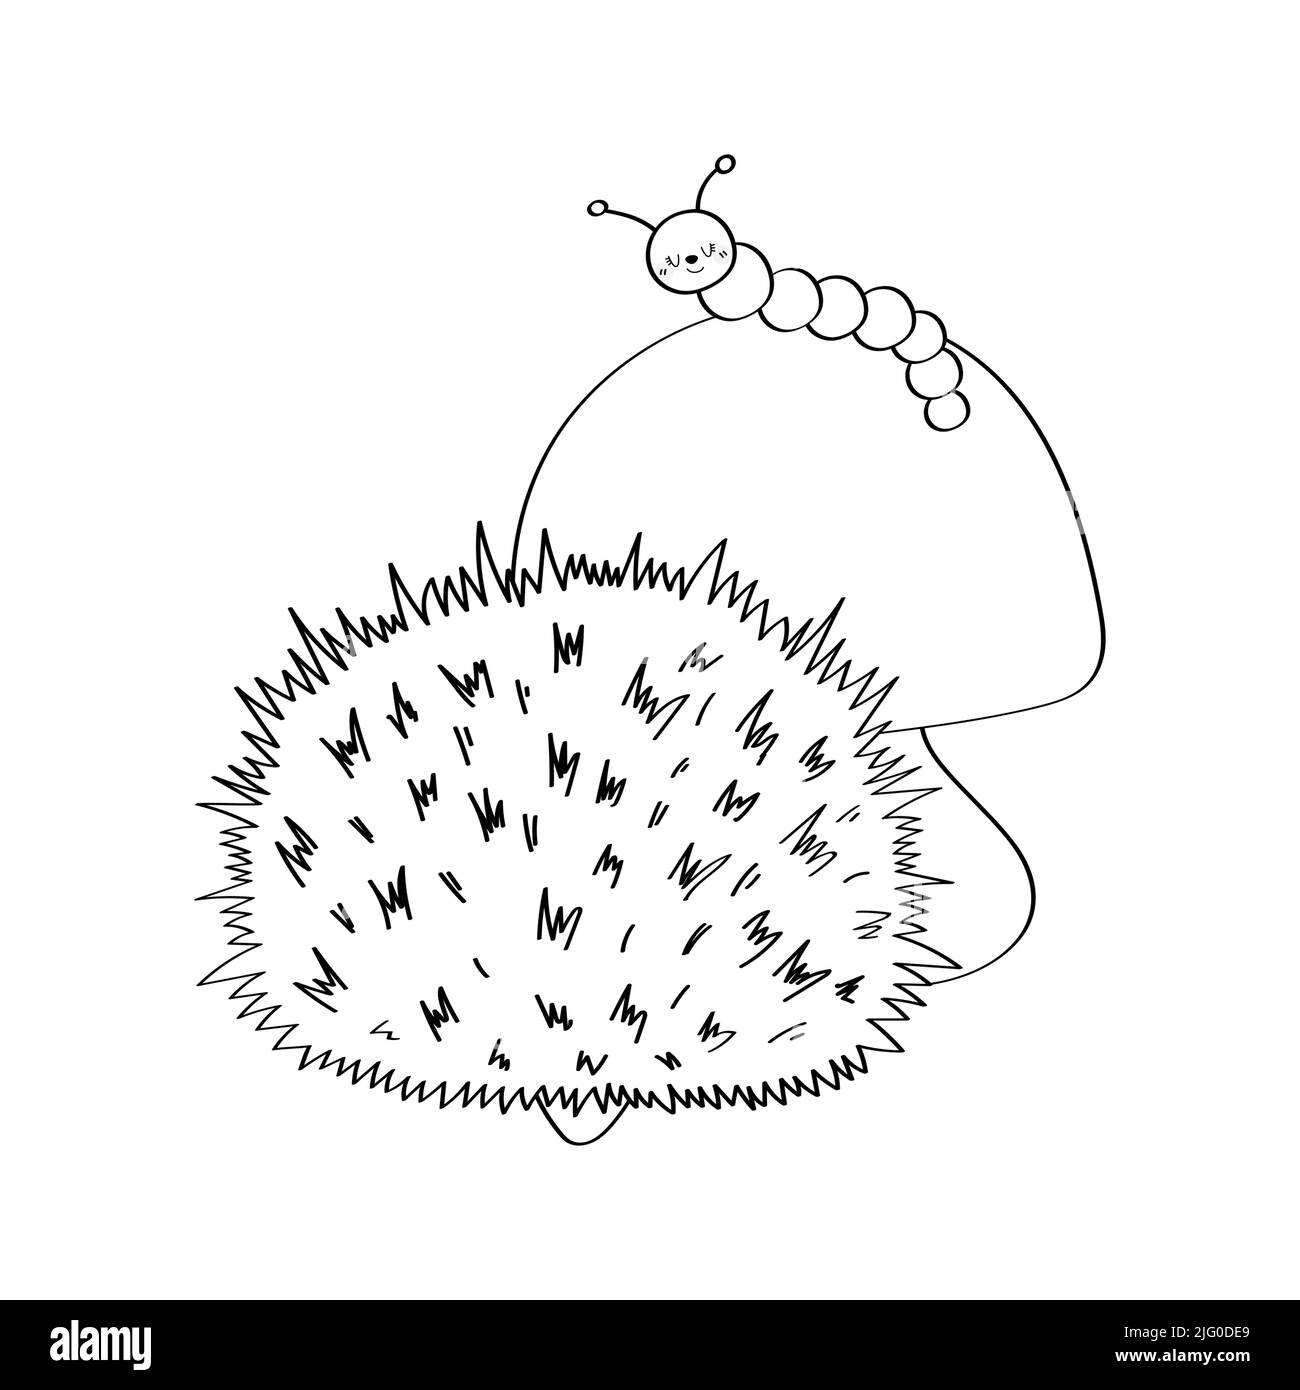 Cute Hedgehog Clipart Isolated on White Background. Funny Clip Art Hedgehog Black and White. Vector Illustration of an Forest Animal for Stickers Stock Vector